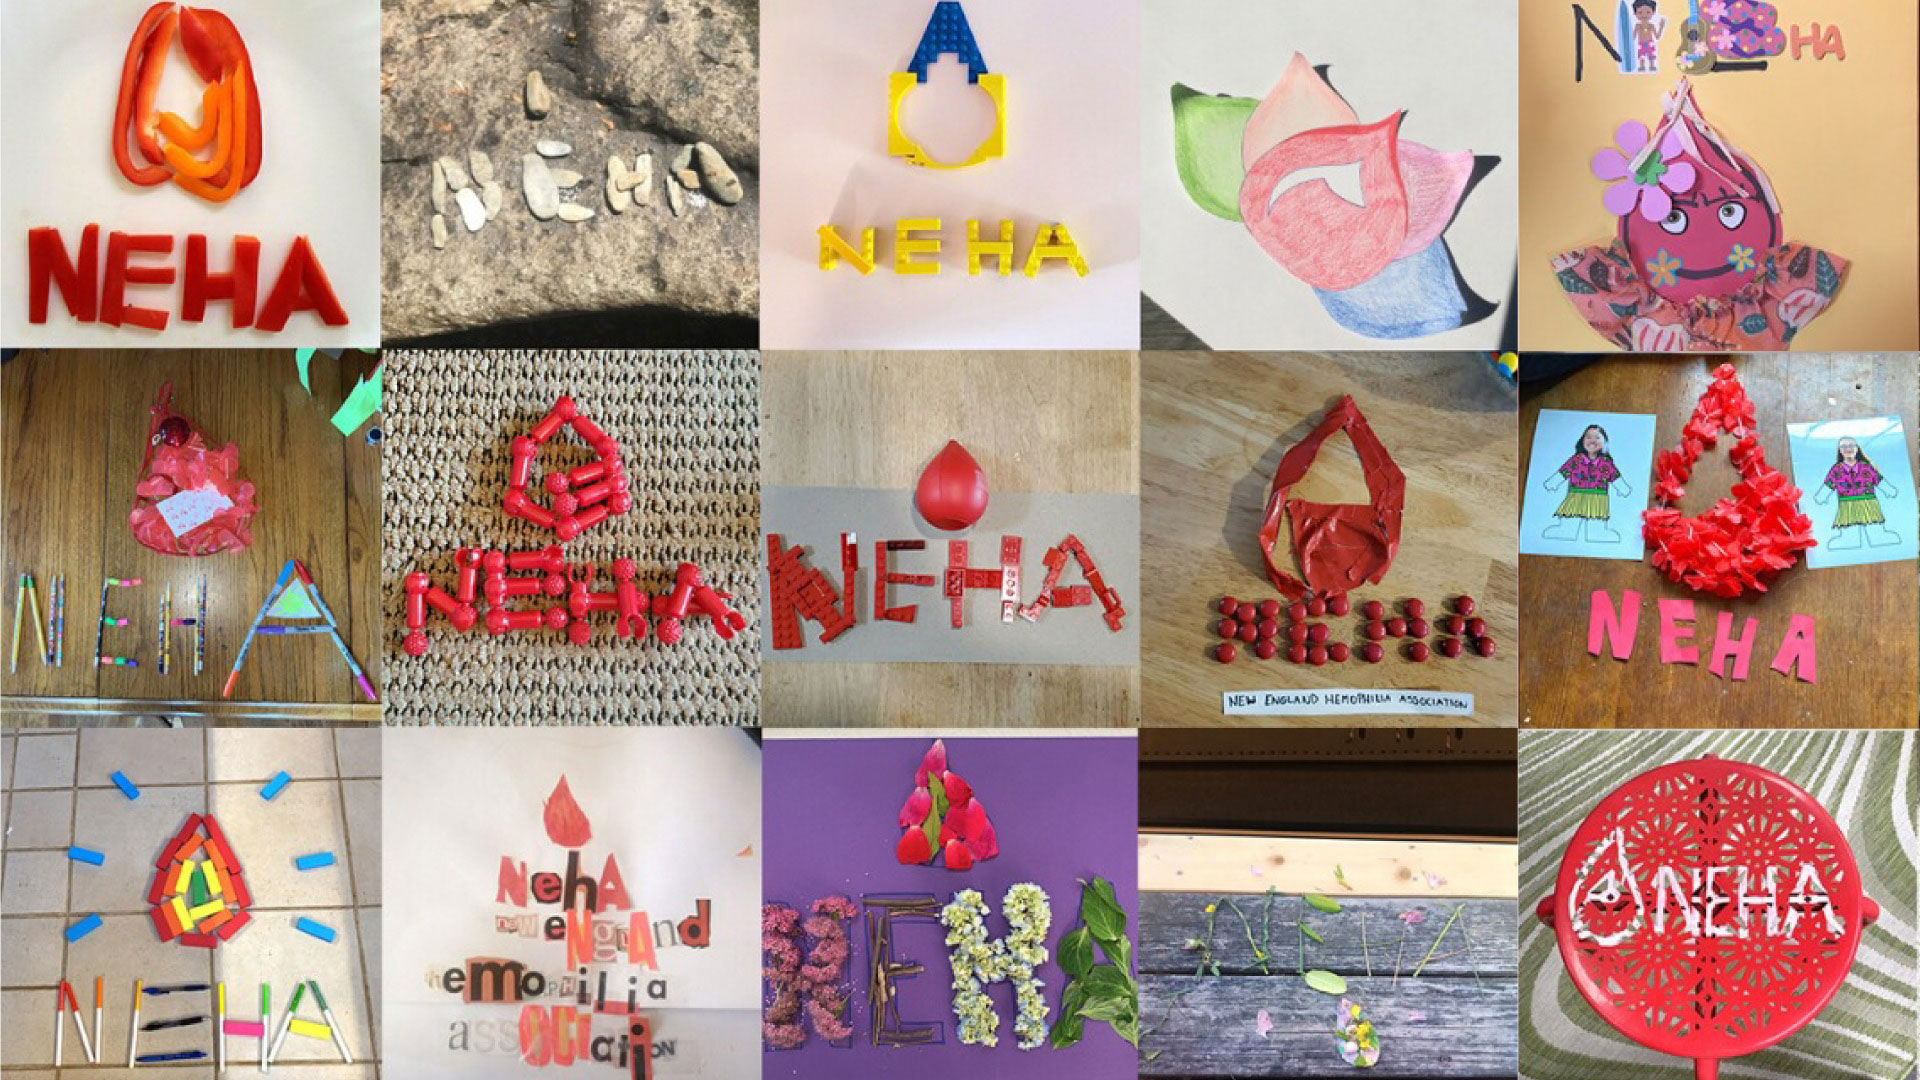 A collage of Neha logos created with different materials like vegetables, lego pieces, plastics, and letters